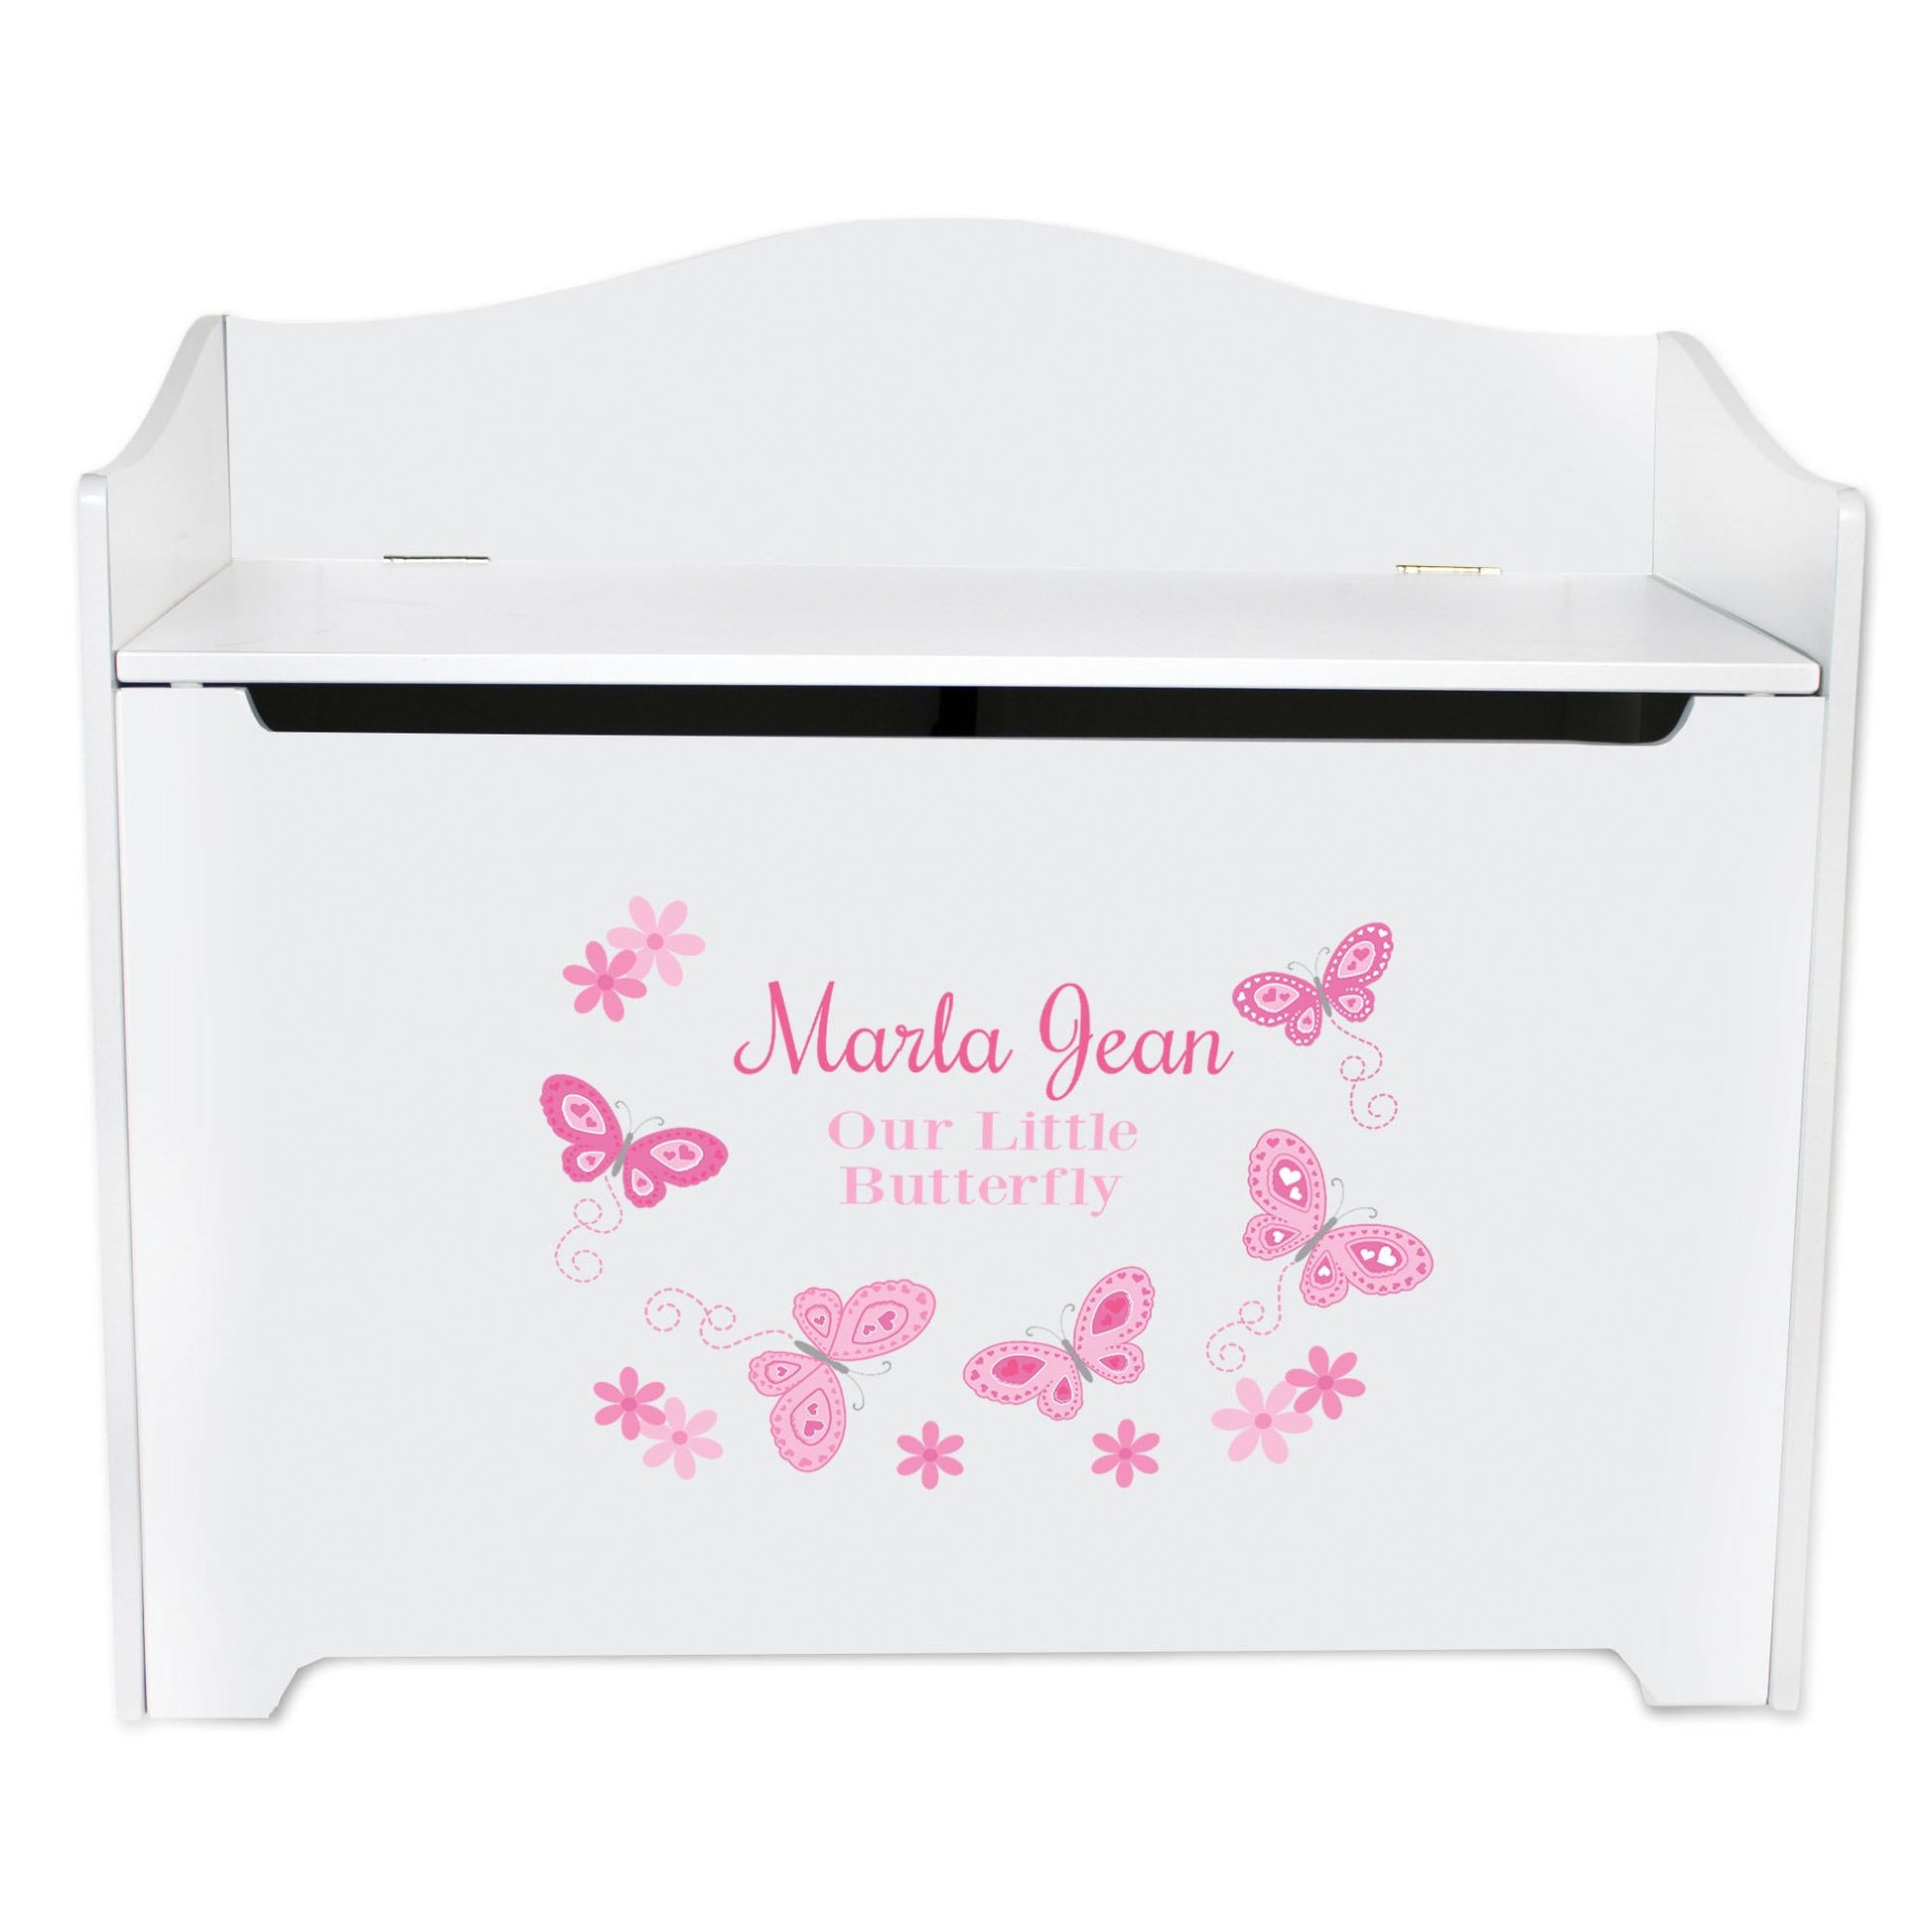 White Wooden Toy Box Bench with Butterflies Pink design